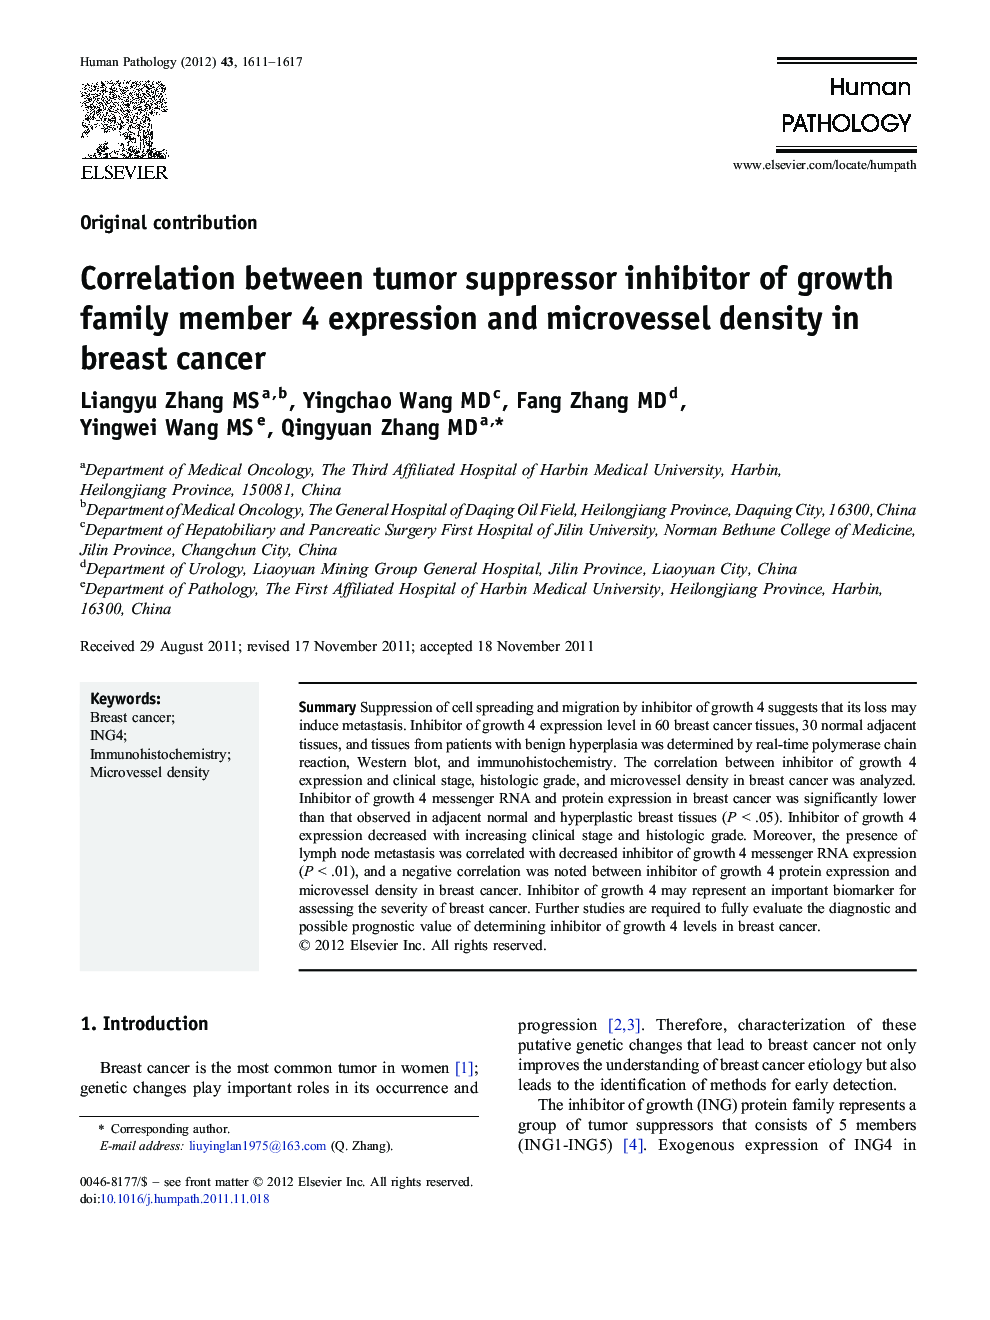 Correlation between tumor suppressor inhibitor of growth family member 4 expression and microvessel density in breast cancer